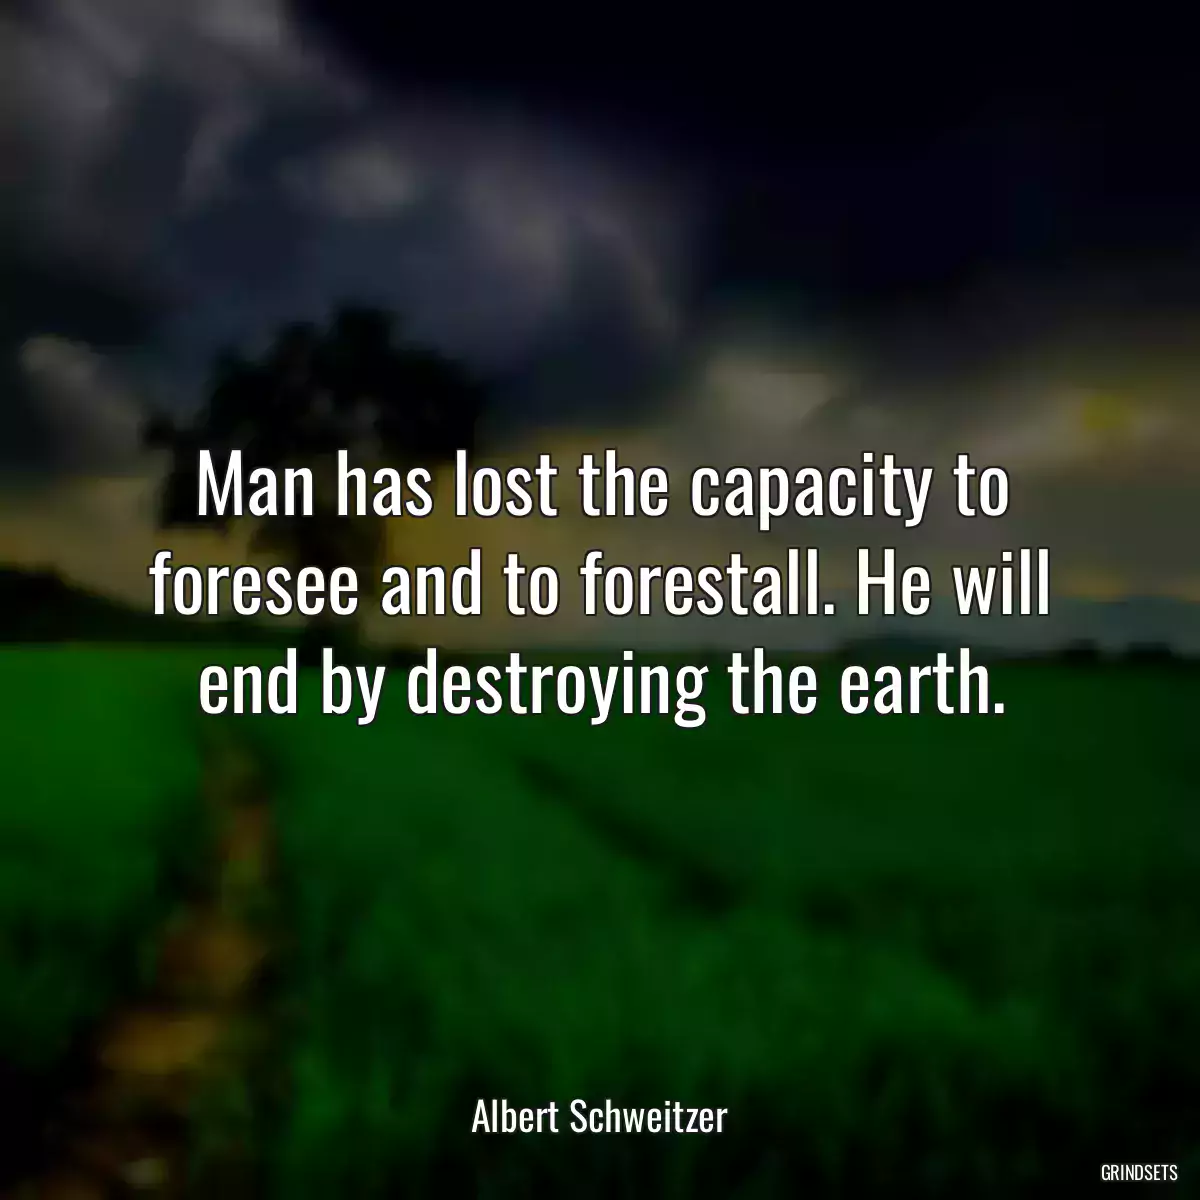 Man has lost the capacity to foresee and to forestall. He will end by destroying the earth.